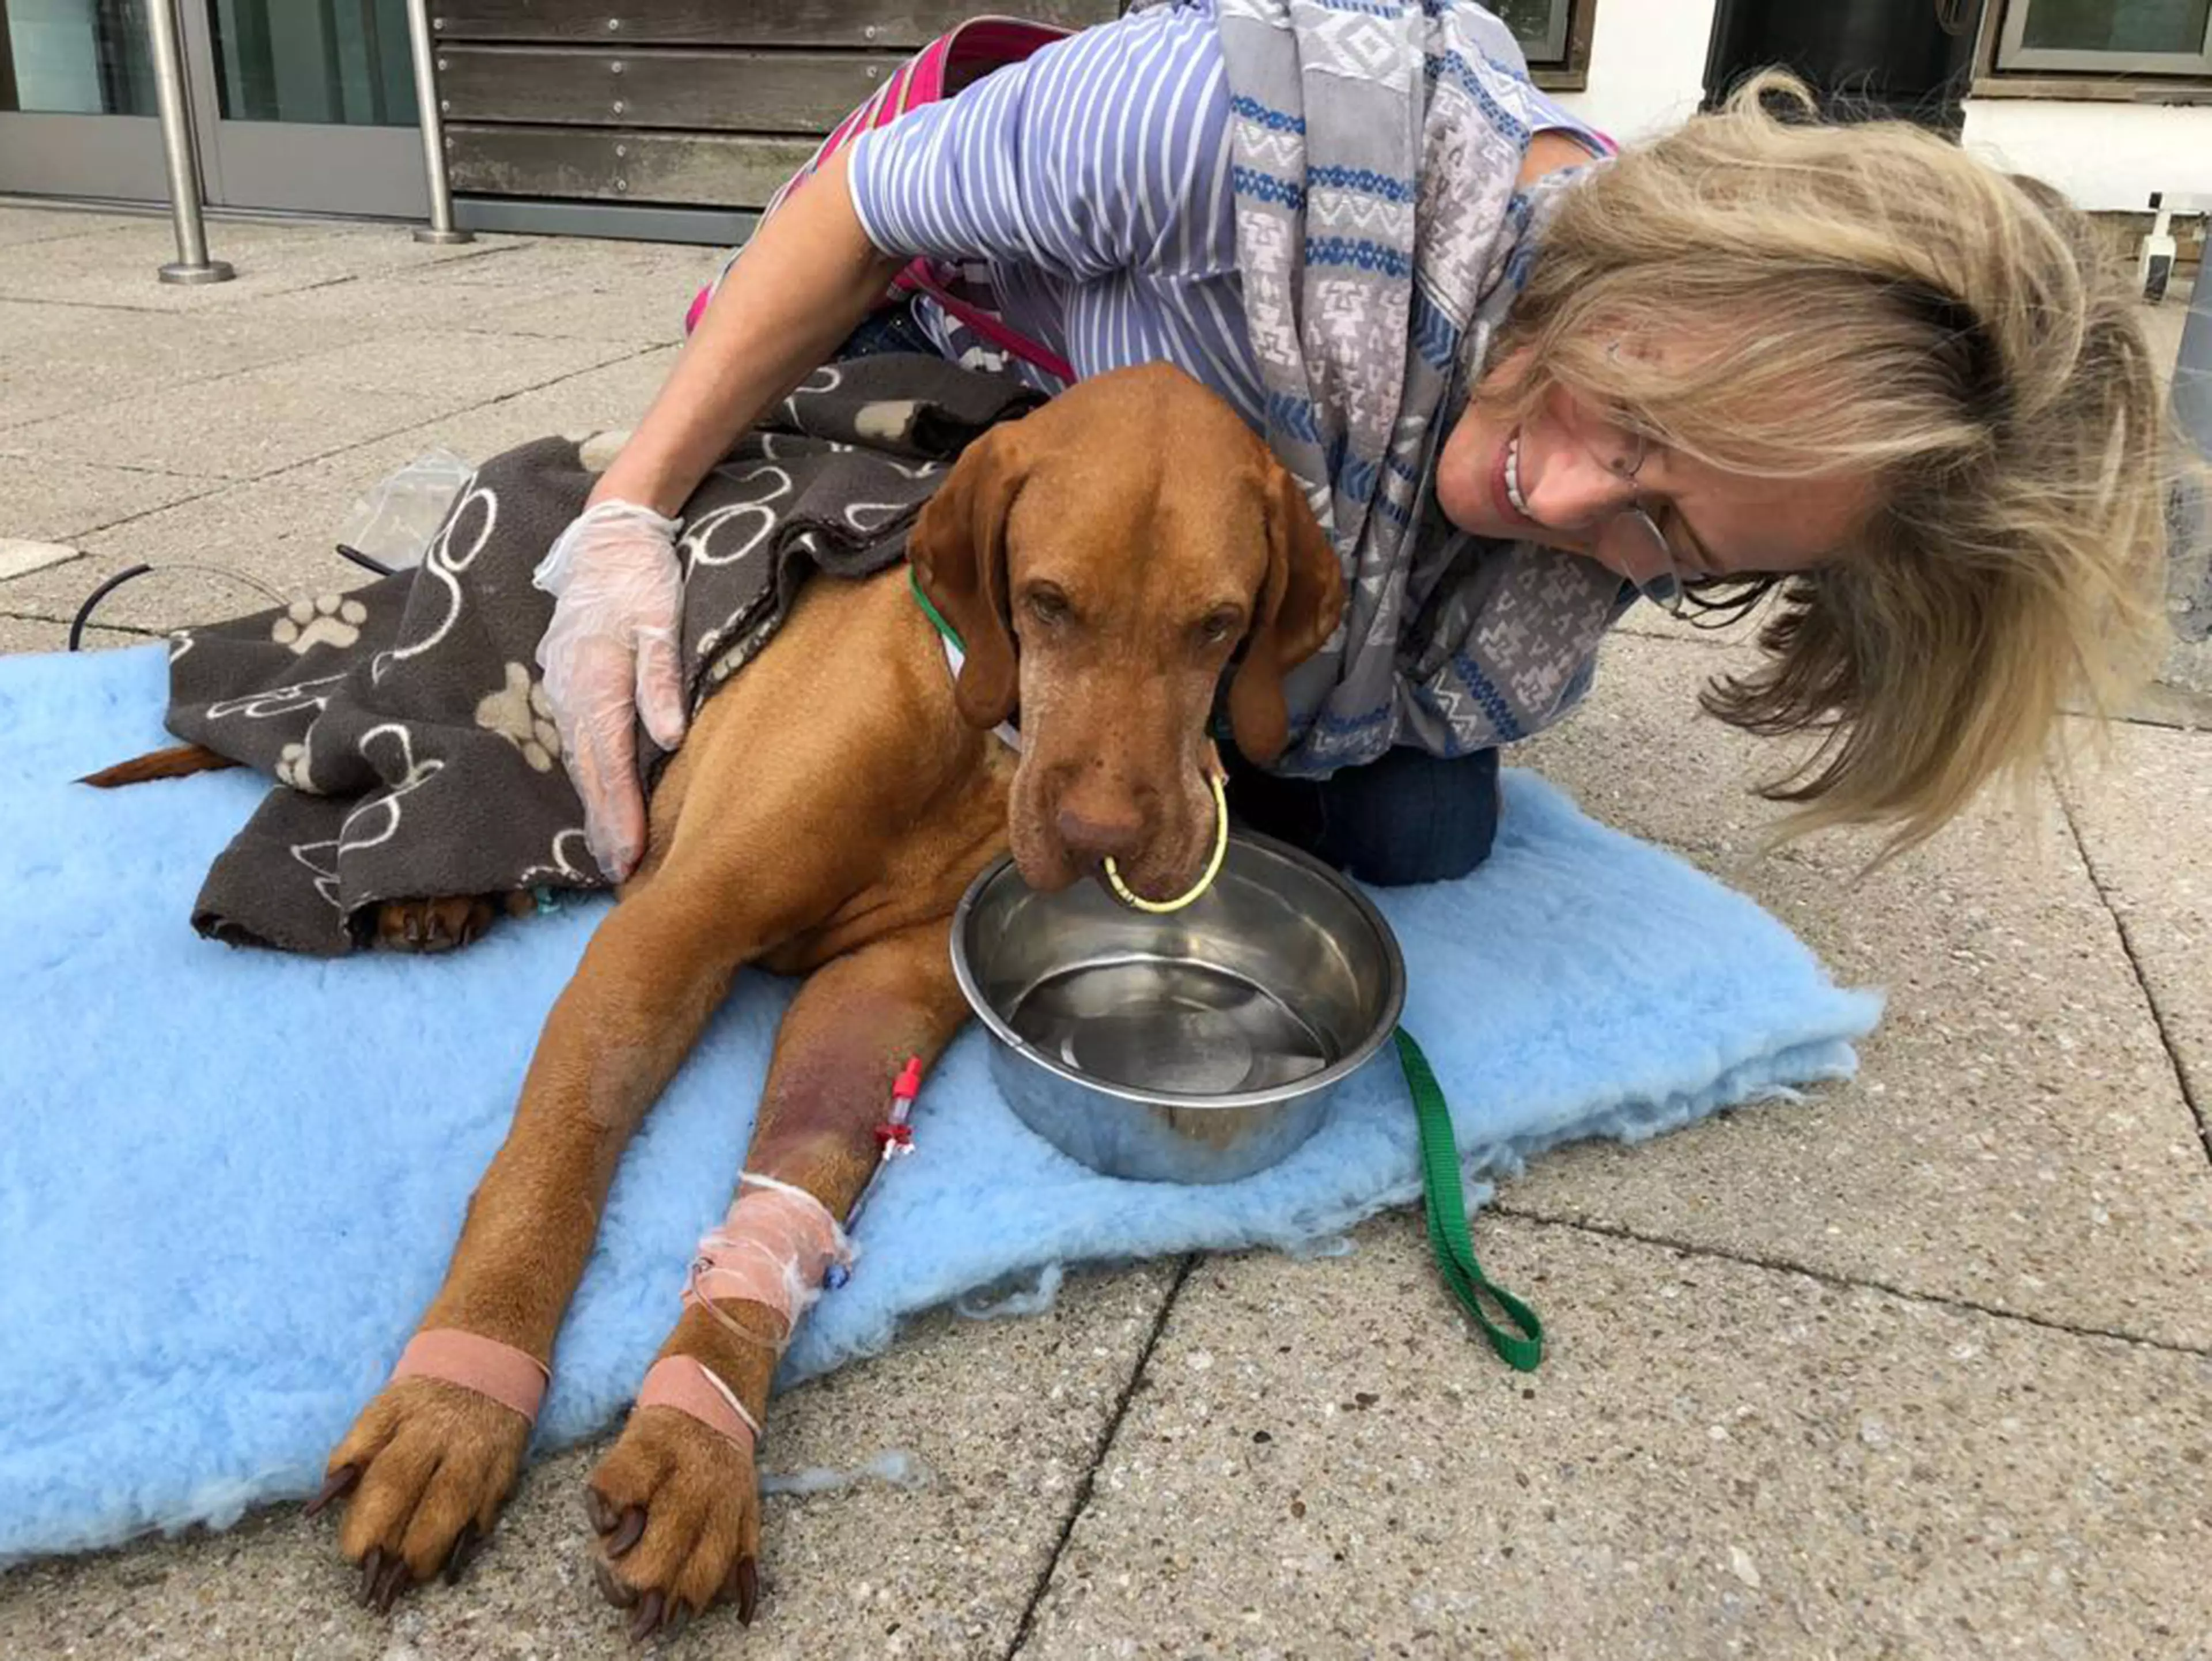 Ruby's owners spent £10,000 trying to save her.